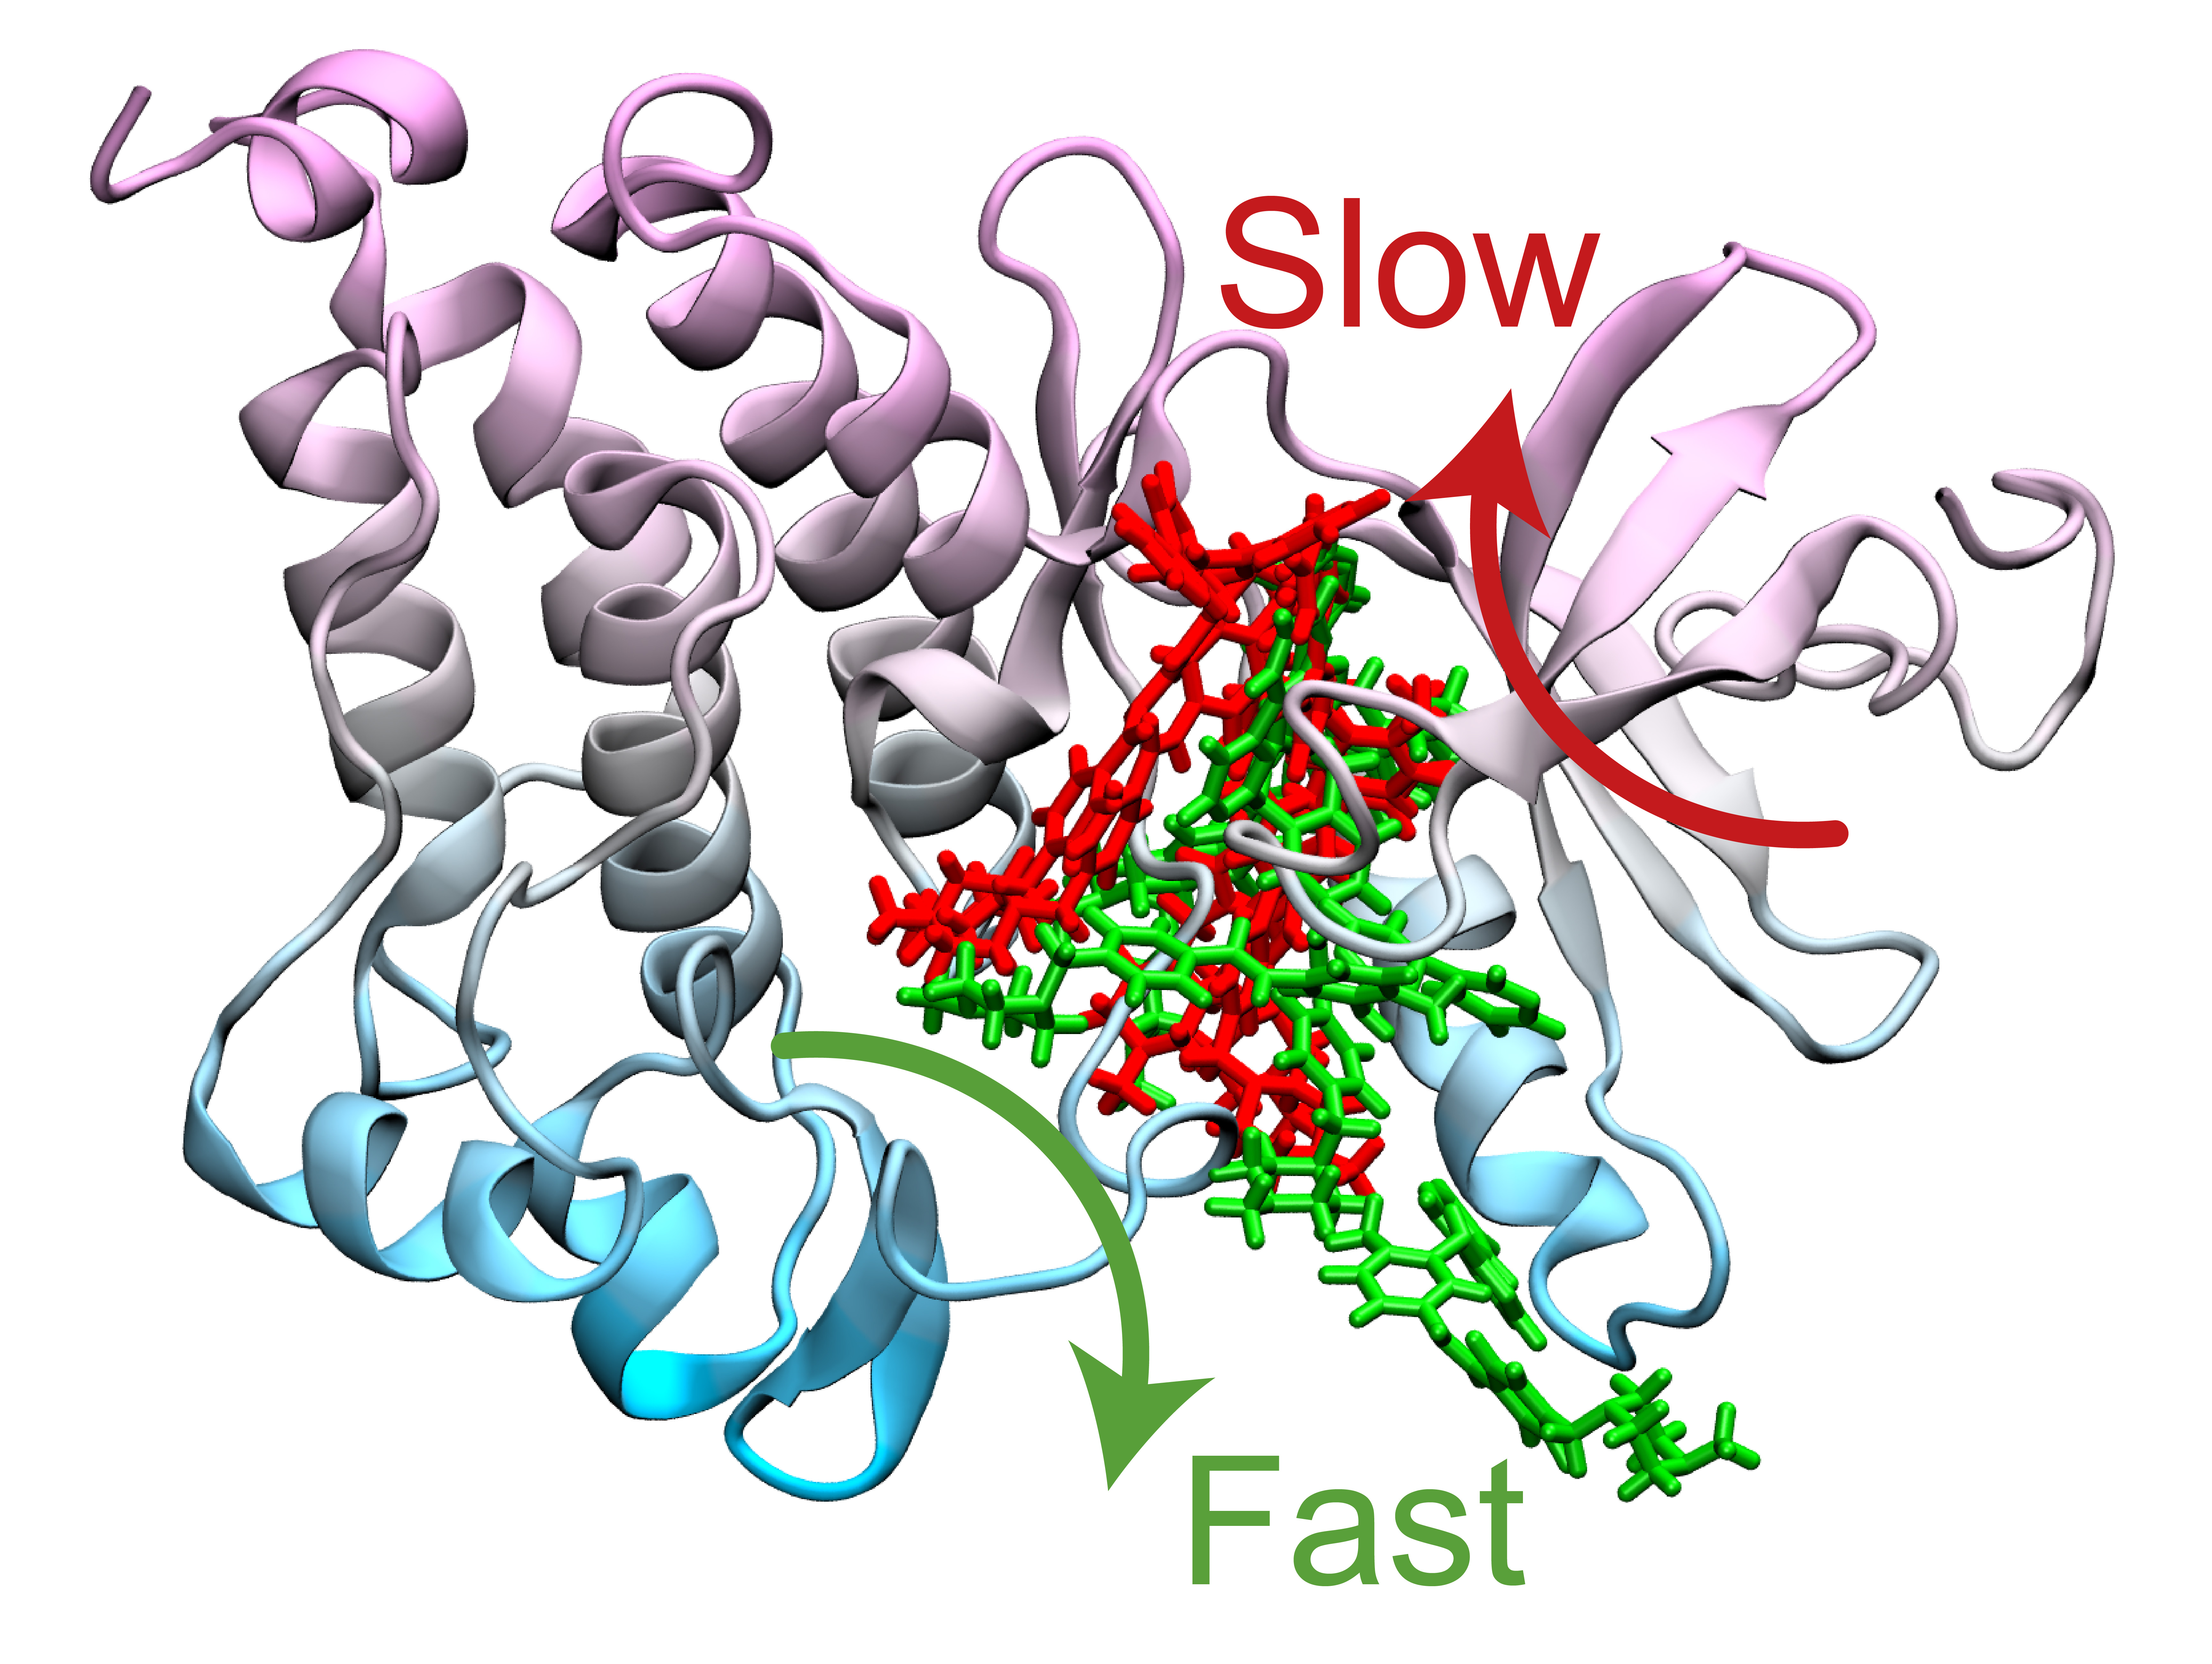 Computer simulation methods developed by Pratyush Tiwary’s lab identified two optimum pathways that Gleevec, a cancer drug, could take to unbind from the protein. The “fast” pathway allows Gleevec to leave the protein three times faster than that of the “slow” pathway, ultimately leading to drug resistance. Photo courtesy of Pratyush Tiwary. Click image to download hi-res version.